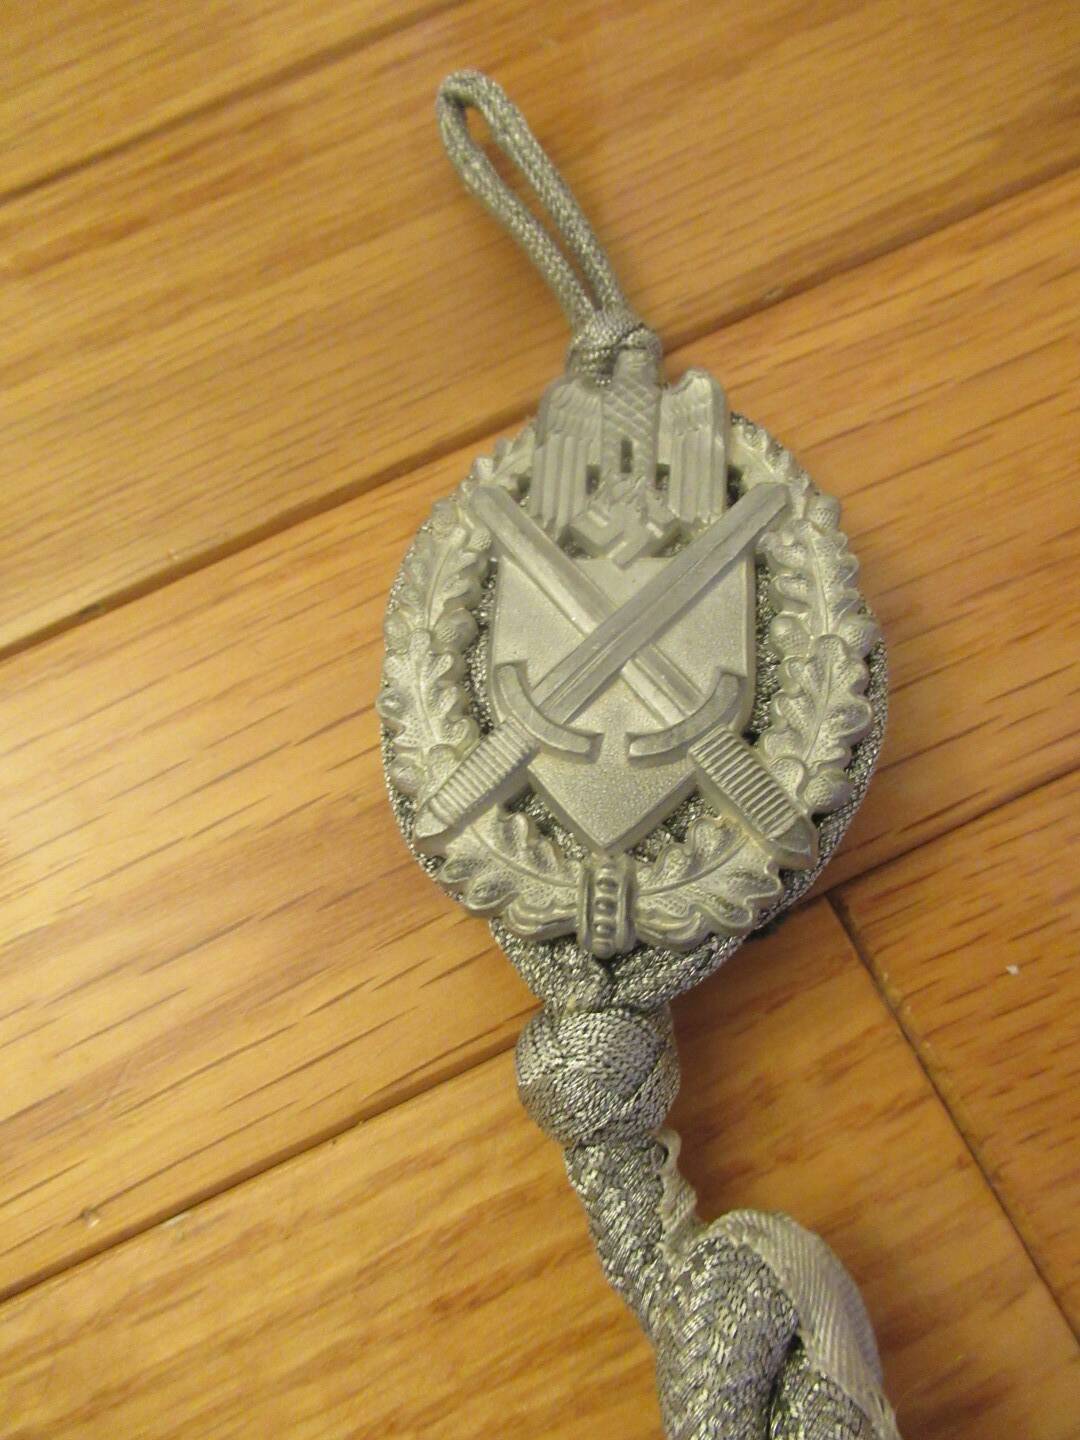 Shooter lanyard 7th degree with maker stamp